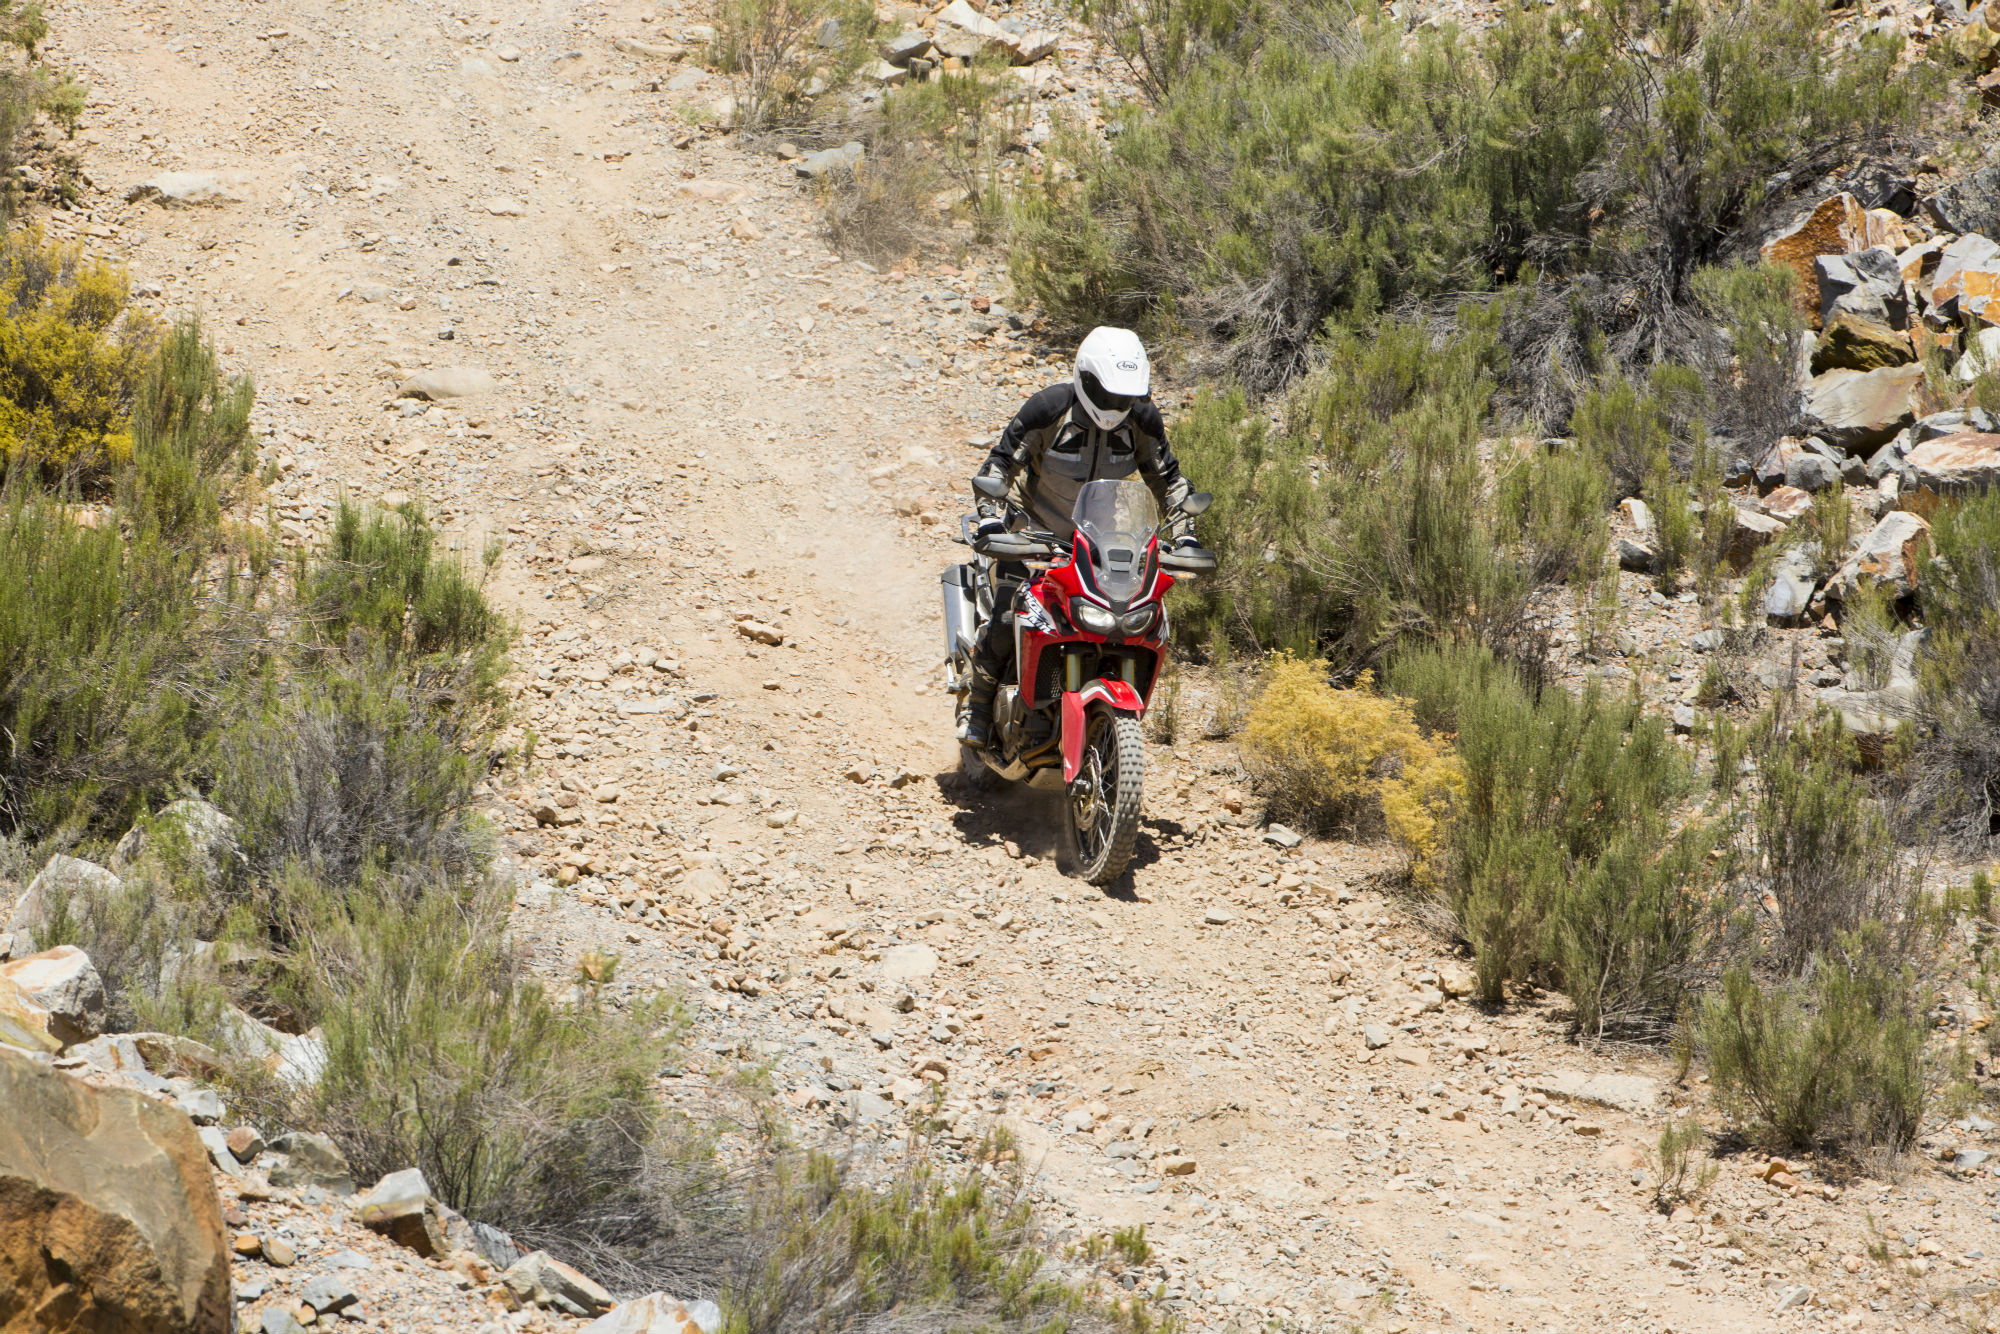 First ride: Honda Africa Twin CRF1000L review